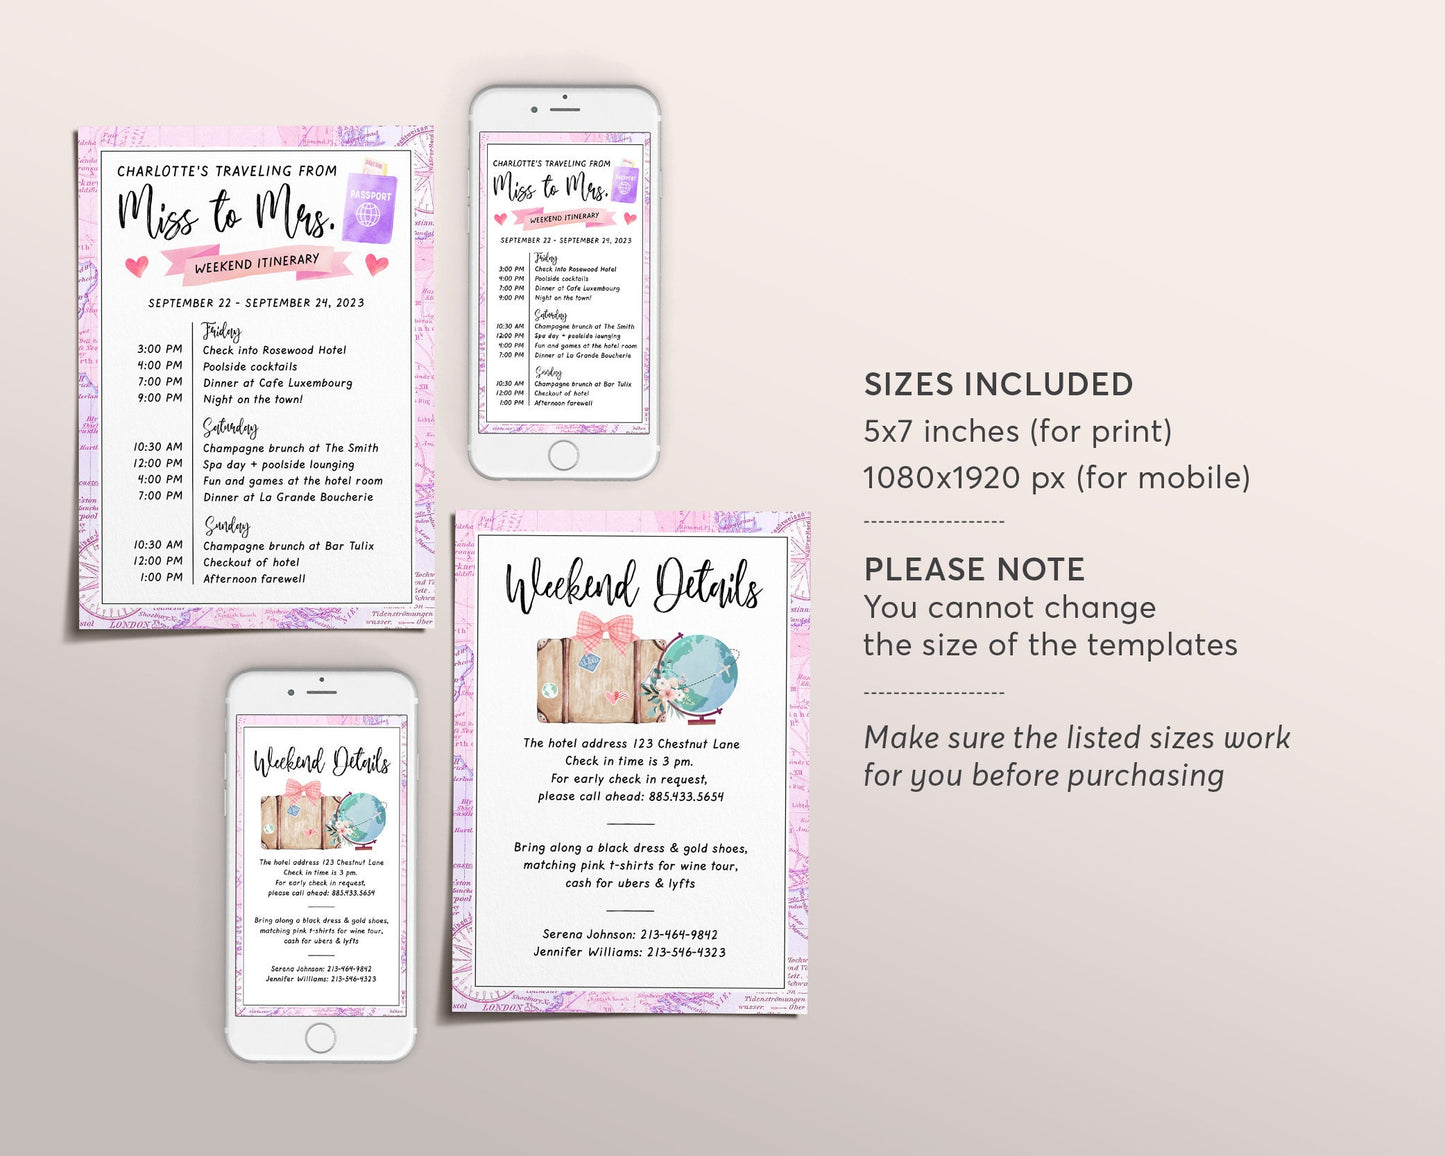 Travel Bachelorette Party Itinerary Editable Template, Traveling From Miss to Mrs. Hen Party Wedding Weekend Events Invitation, Floral Globe